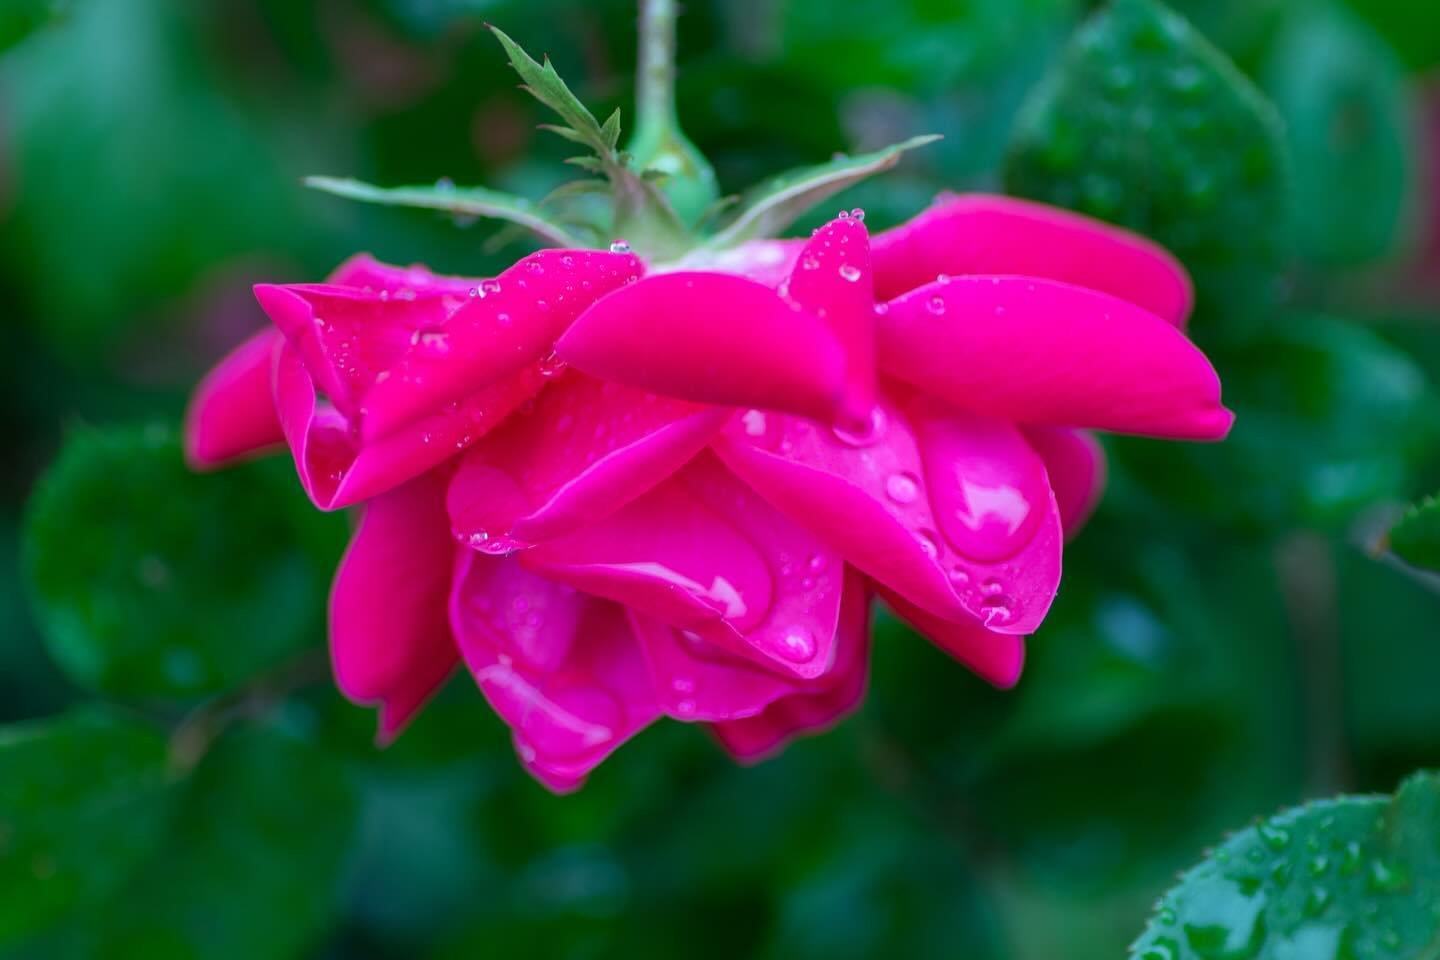 &ldquo;A profusion of pink roses bending ragged in the rain speaks to me of all gentleness and its enduring.&rdquo; &ndash; William Carlos Williams